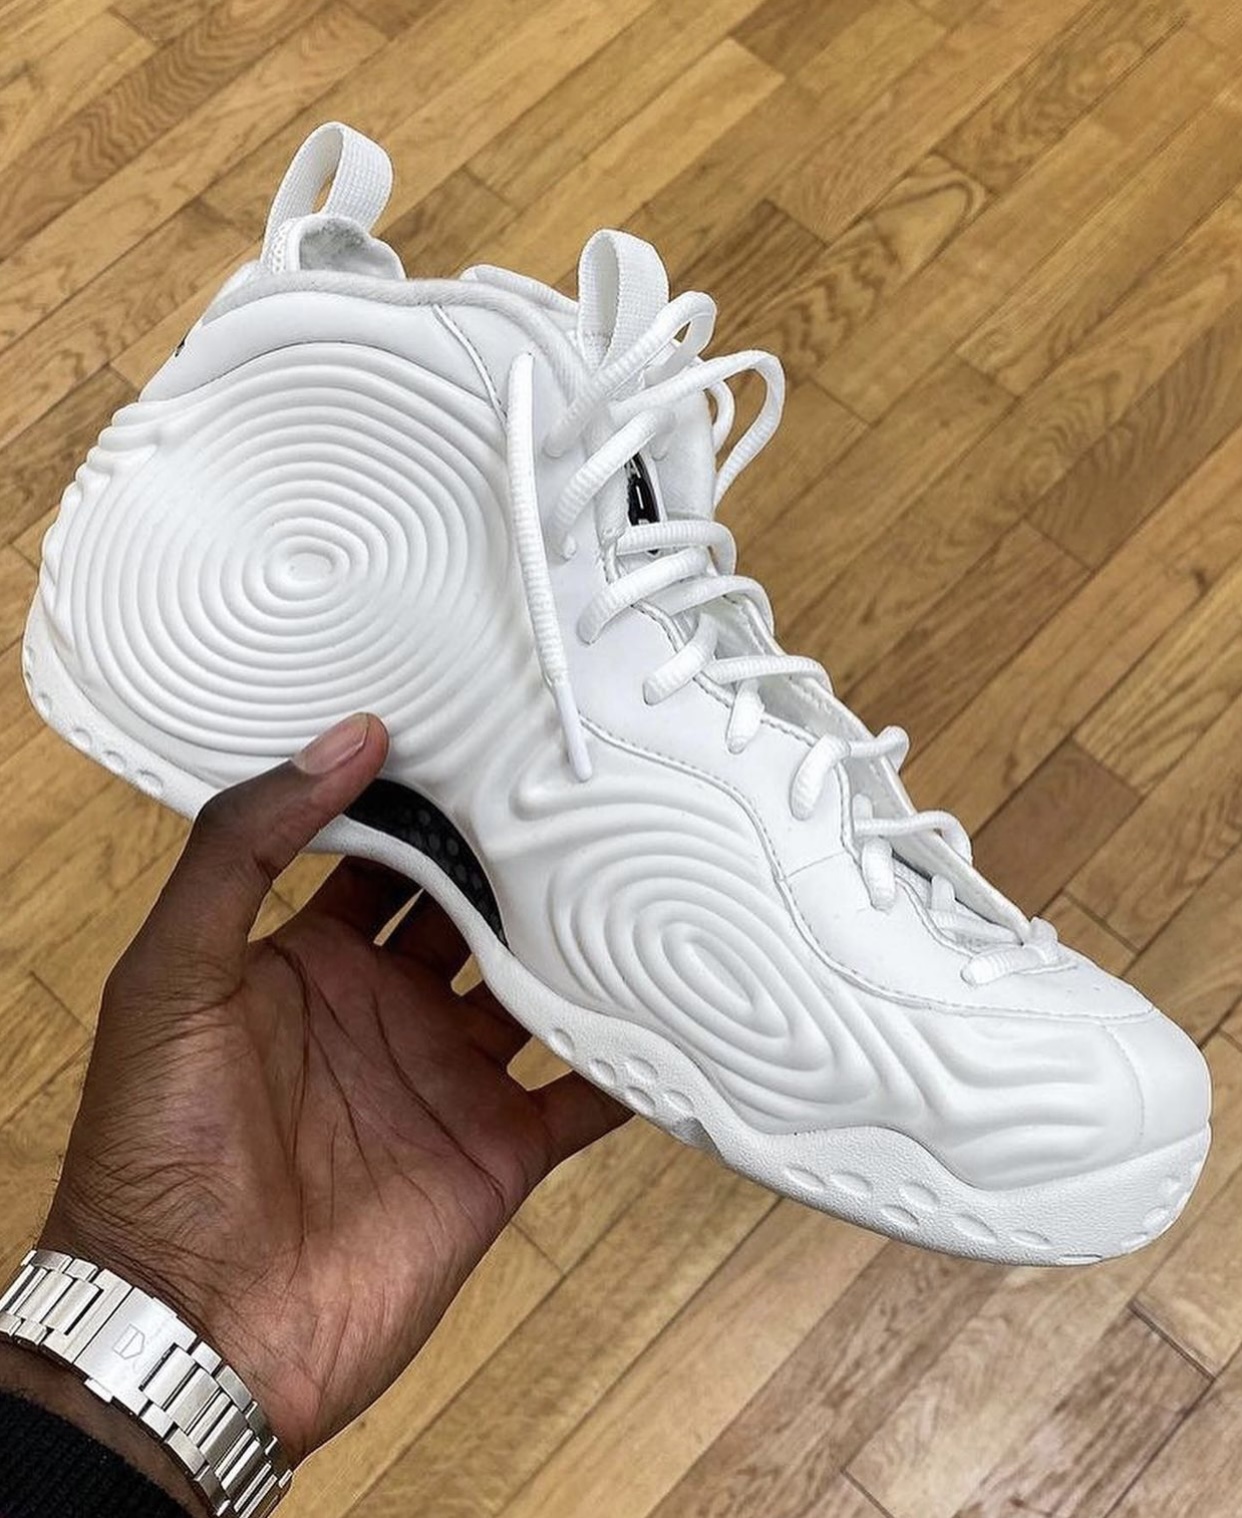 CDG Comme des Garcons Nike Air Foamposite One White Release Date